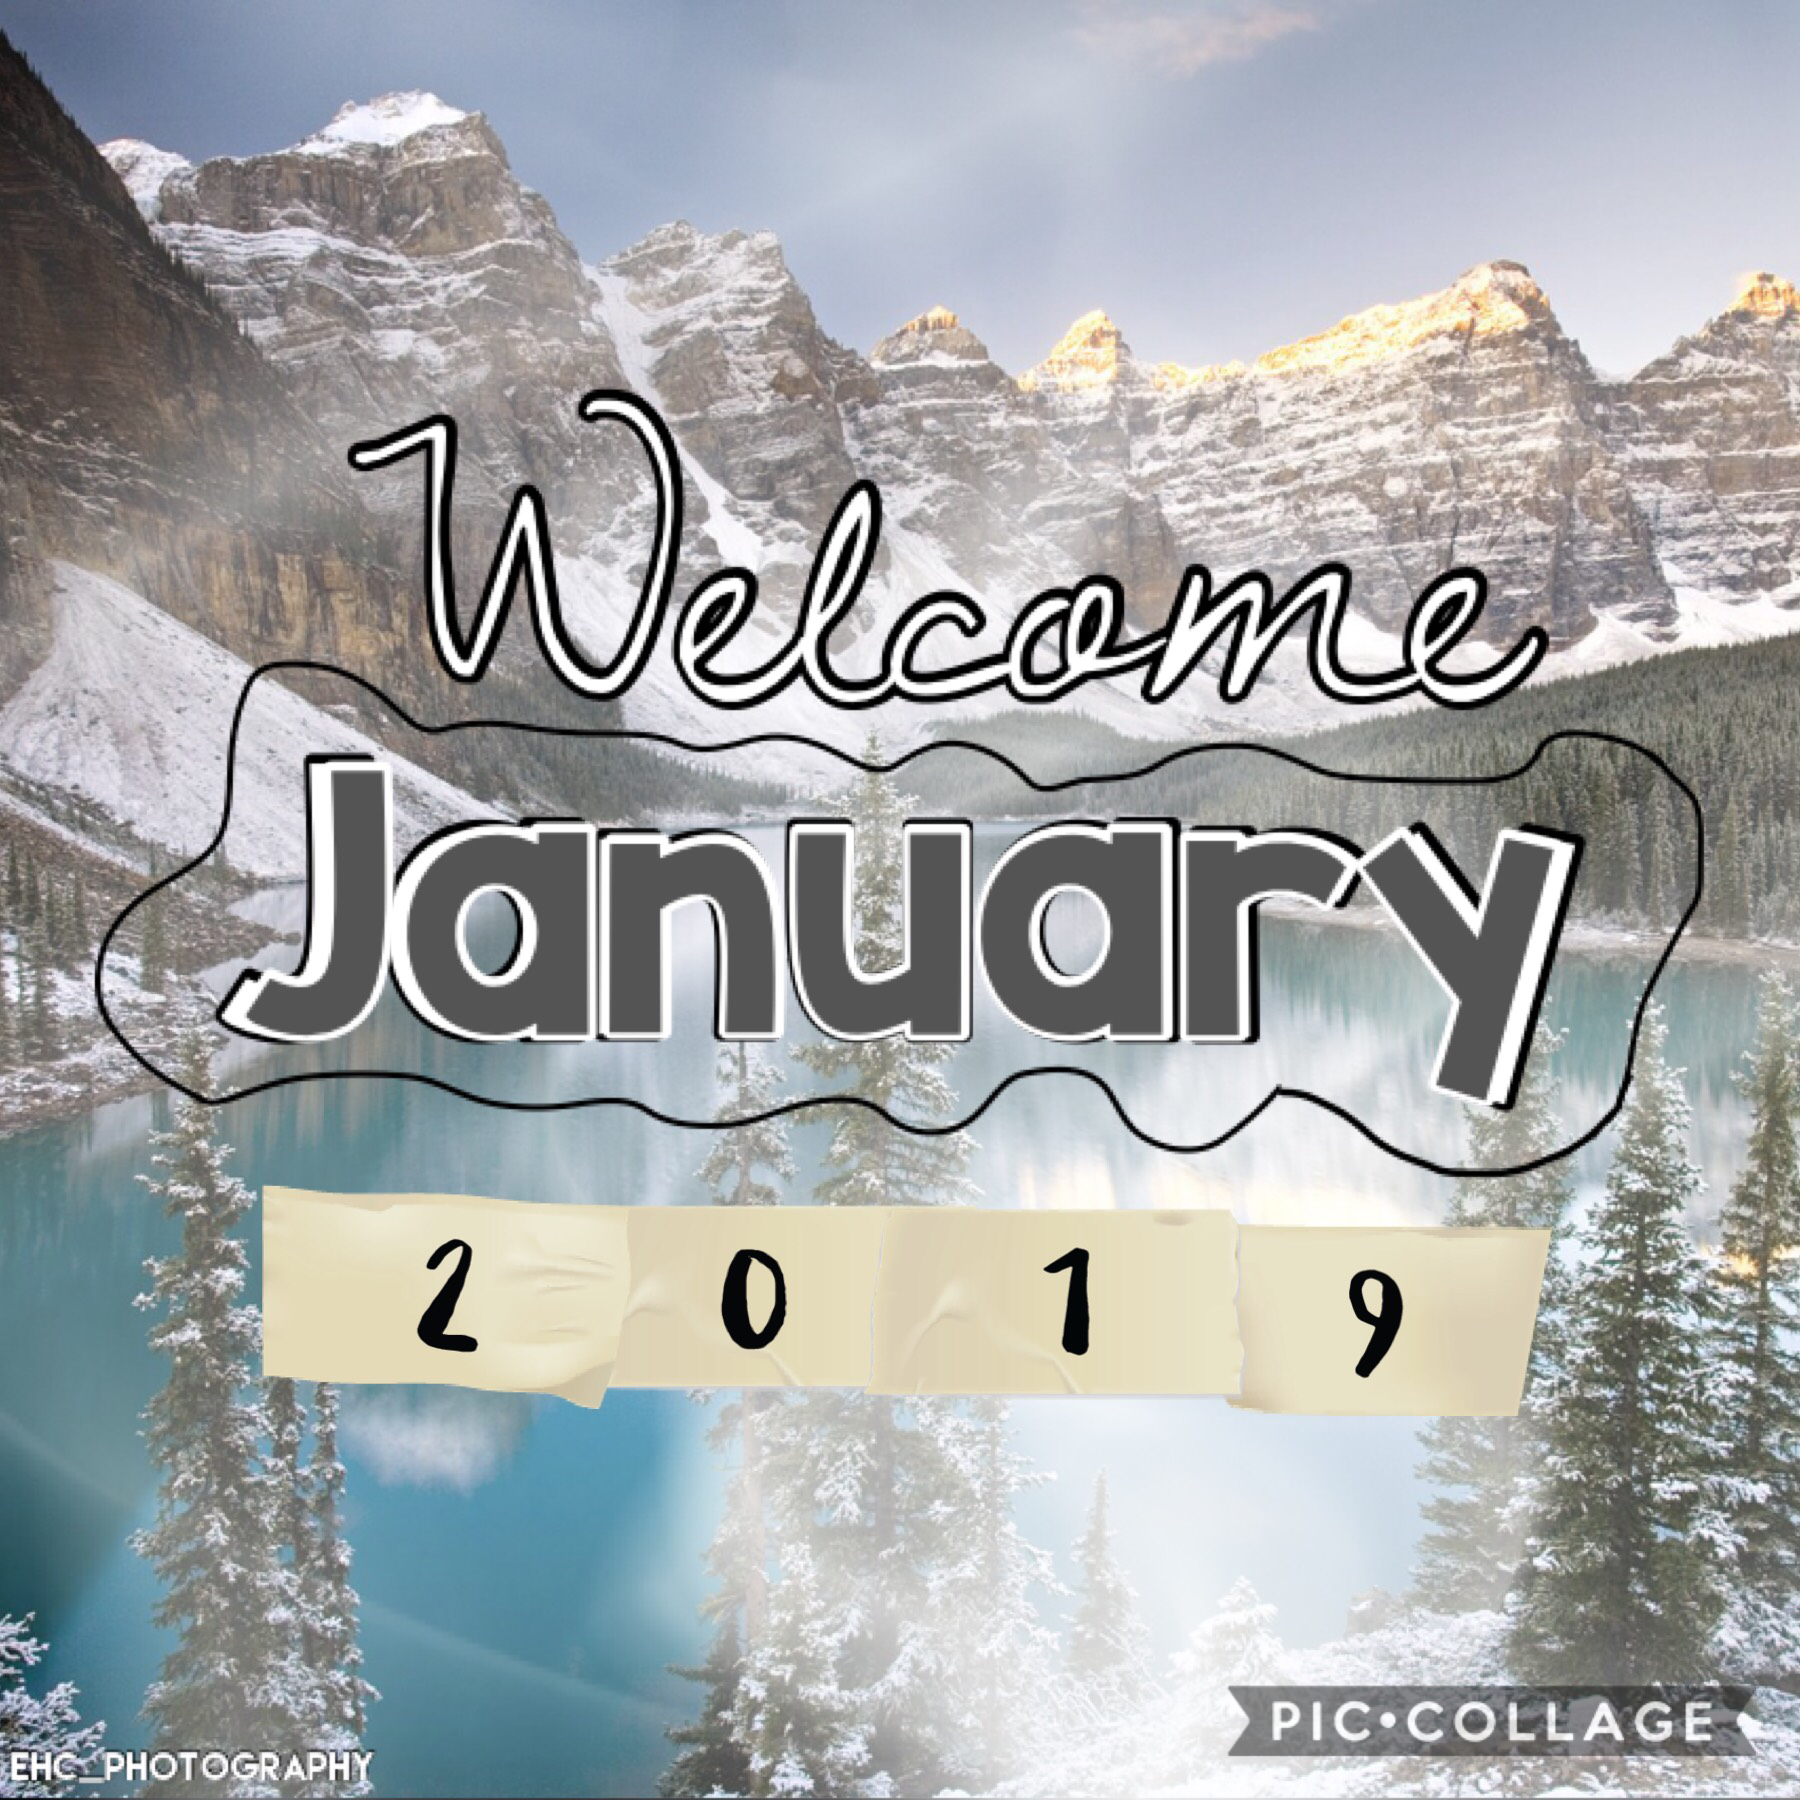 Happy January! ⛄️ 🧣 ❄️ ☕️ 🧤 🌨 🛷 ⛸ I’m reposting this cuz I changed it. 🙃 It’s snowing, we haven’t had any at all lately. 😱 I still need to post an update about my b-day and Christmas, but I’m off until Monday so I’ll try to do it soon. 🤞🏻 